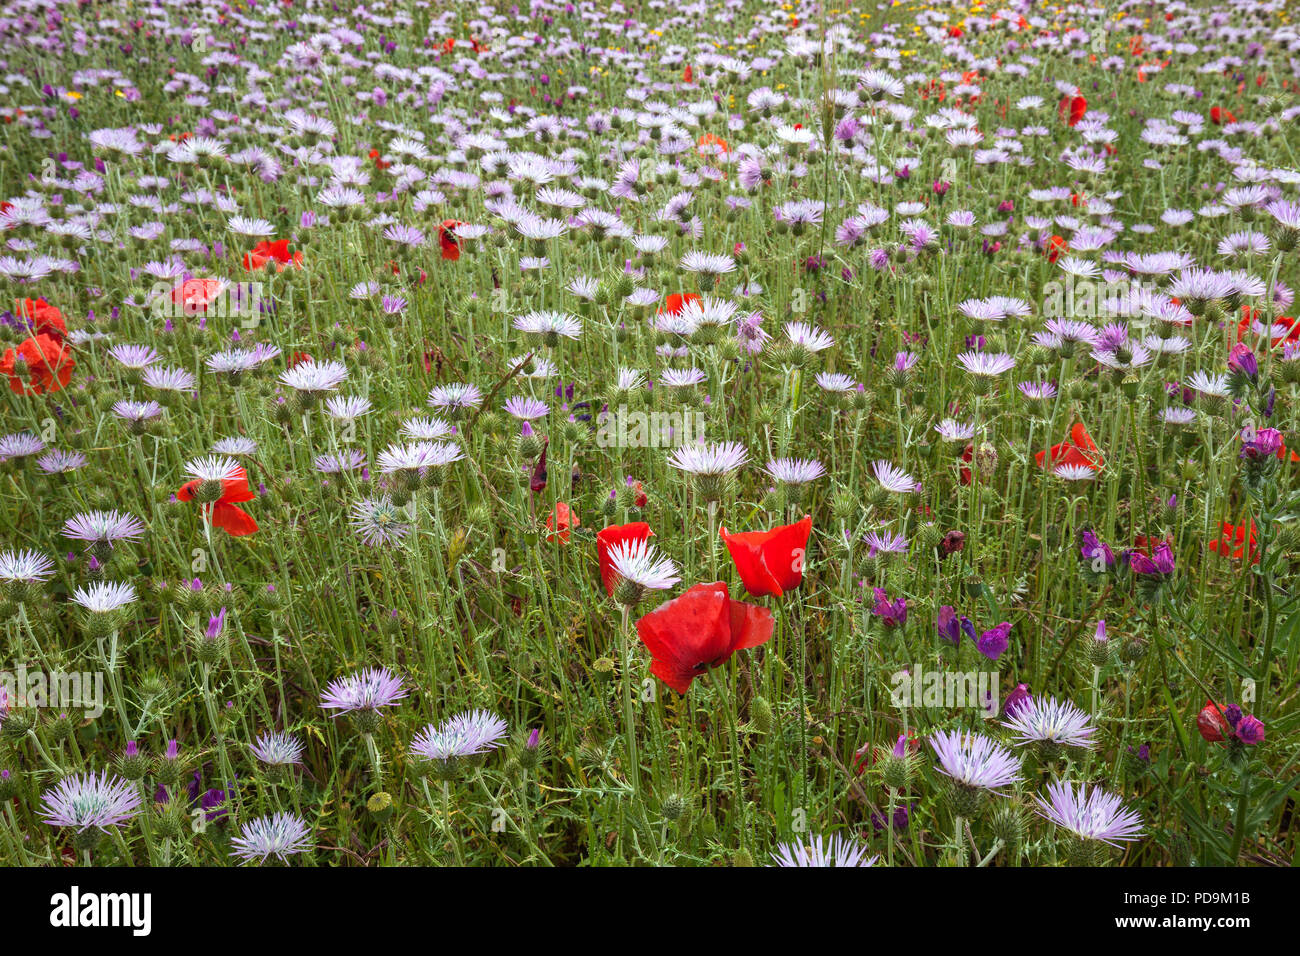 Blooming flower meadow with Purple Milk Thistles (Galactites tomentosus) and Corn poppy (Papaver rhoeas), at El Tablero Stock Photo